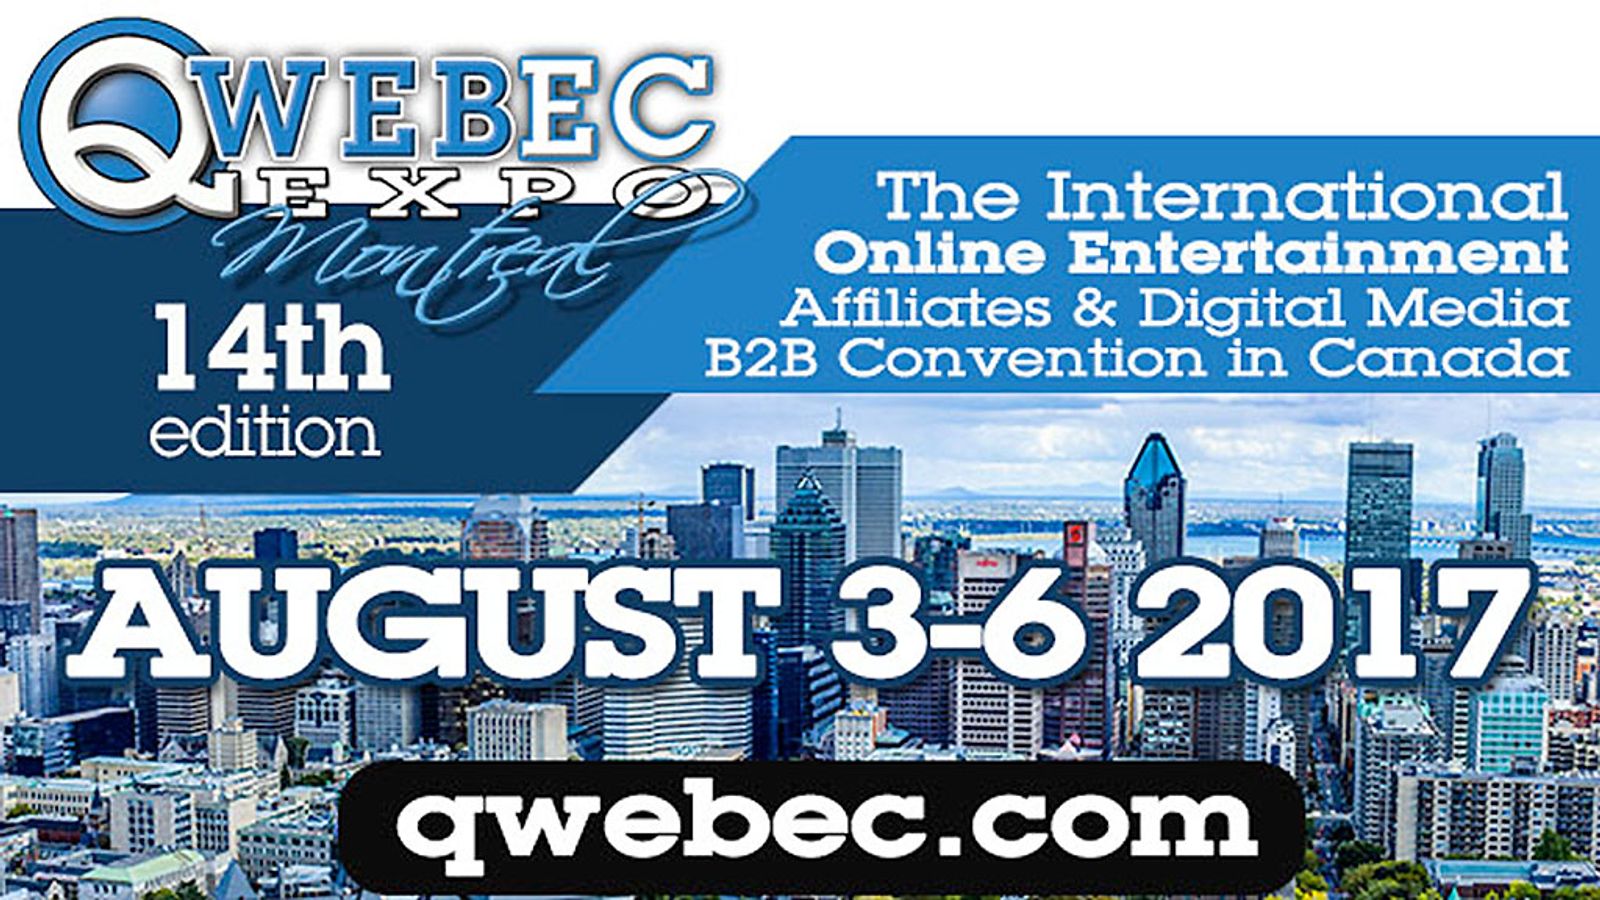 ASACP Returns to QWEBEC Expo, Reaches Out to World's Webmasters